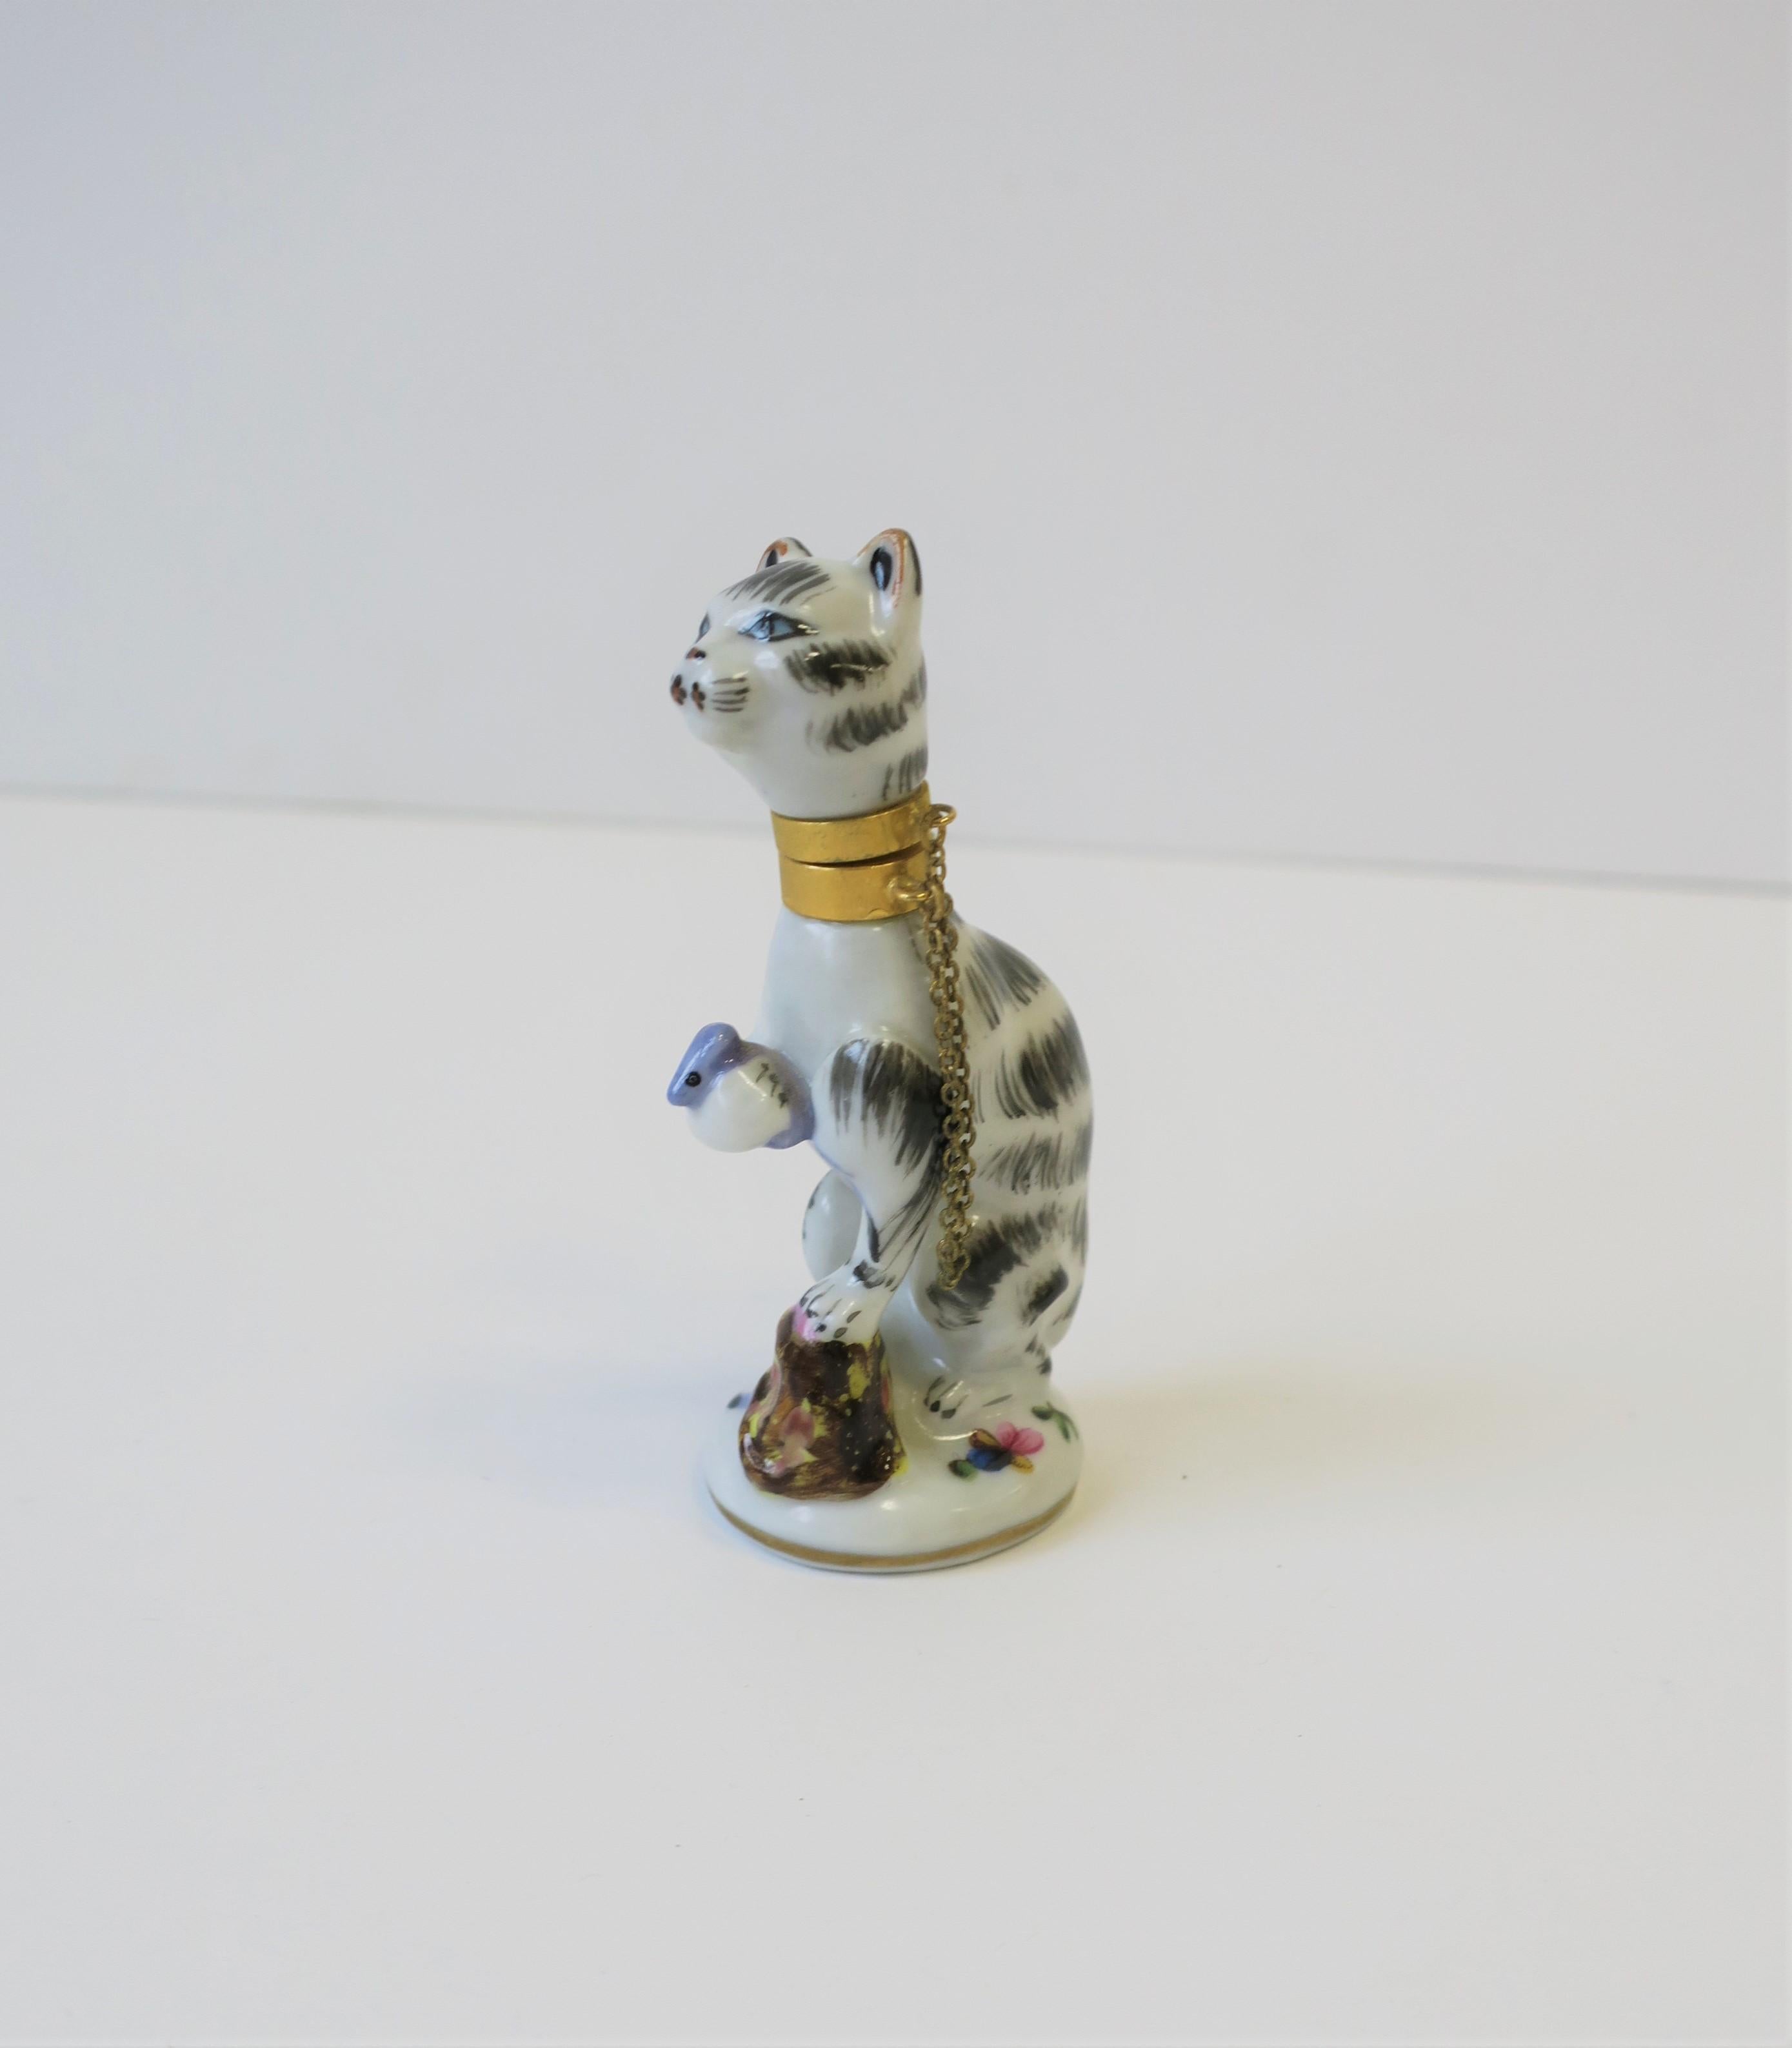 A great cat and mouse porcelain perfume bottle with brass collar and removeable head, circa 20th century, Metropolitan Museum of Art, New York. Cat has a black and white coat, blue eyes and brass collar with chain. Cat is holding mouse in paw.